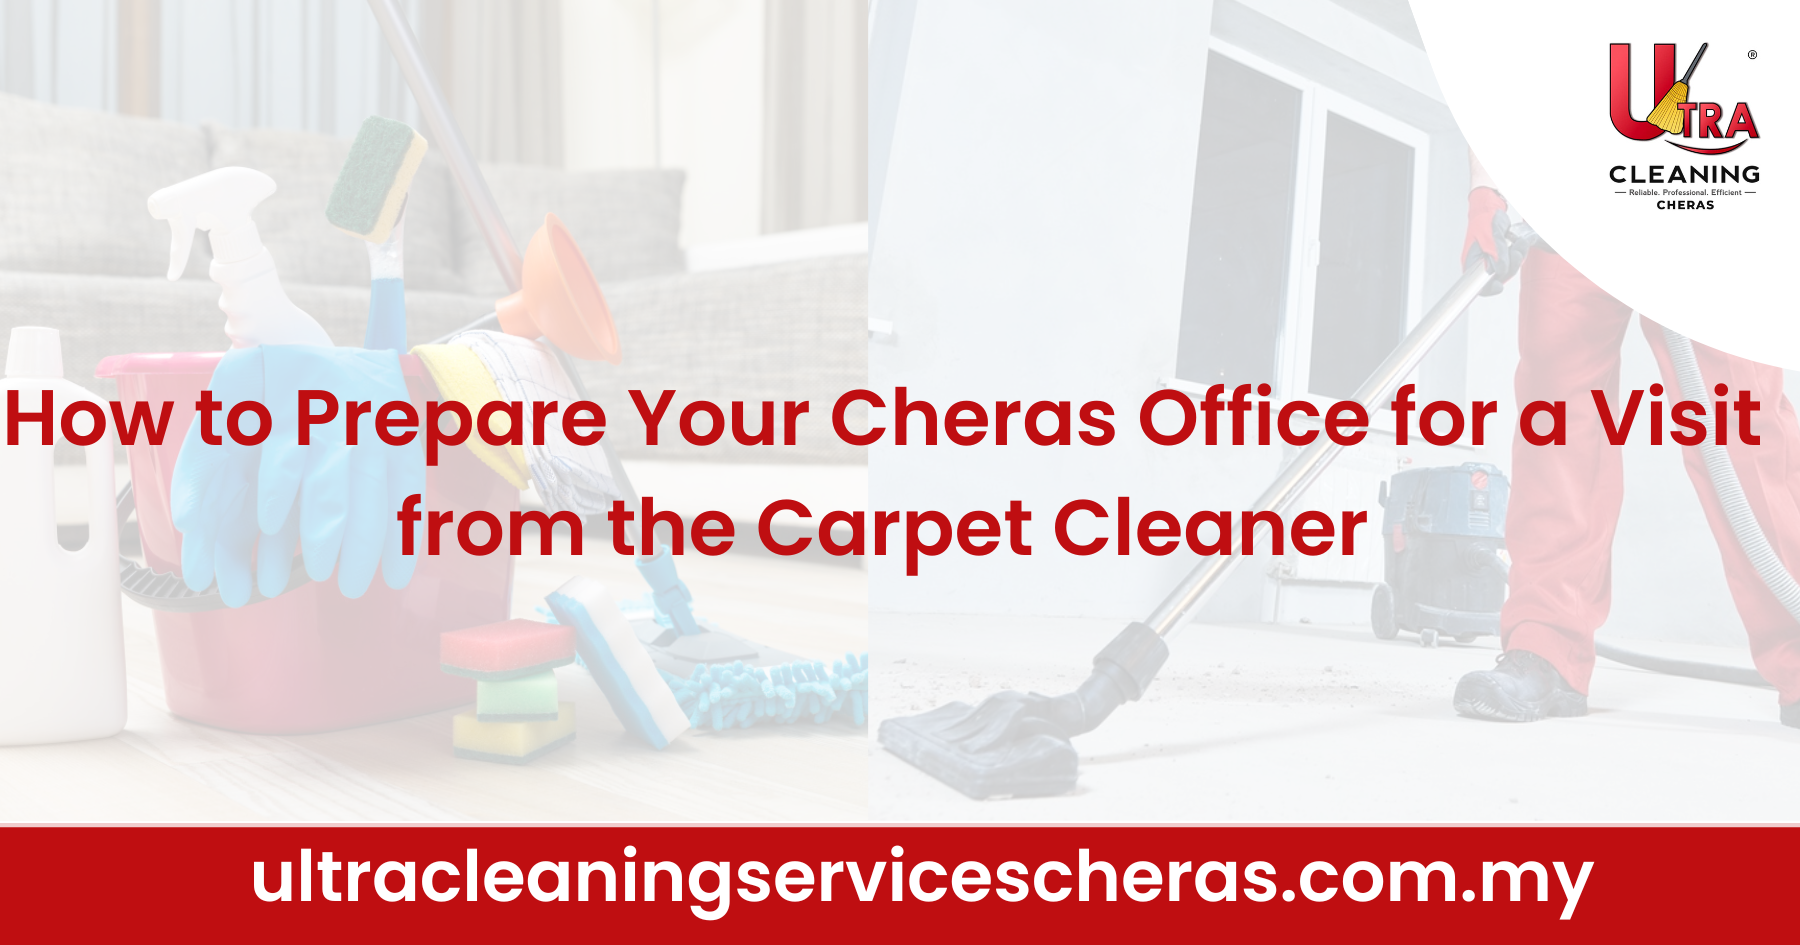 How to Prepare Your Cheras Office for a Visit from the Carpet Cleaner